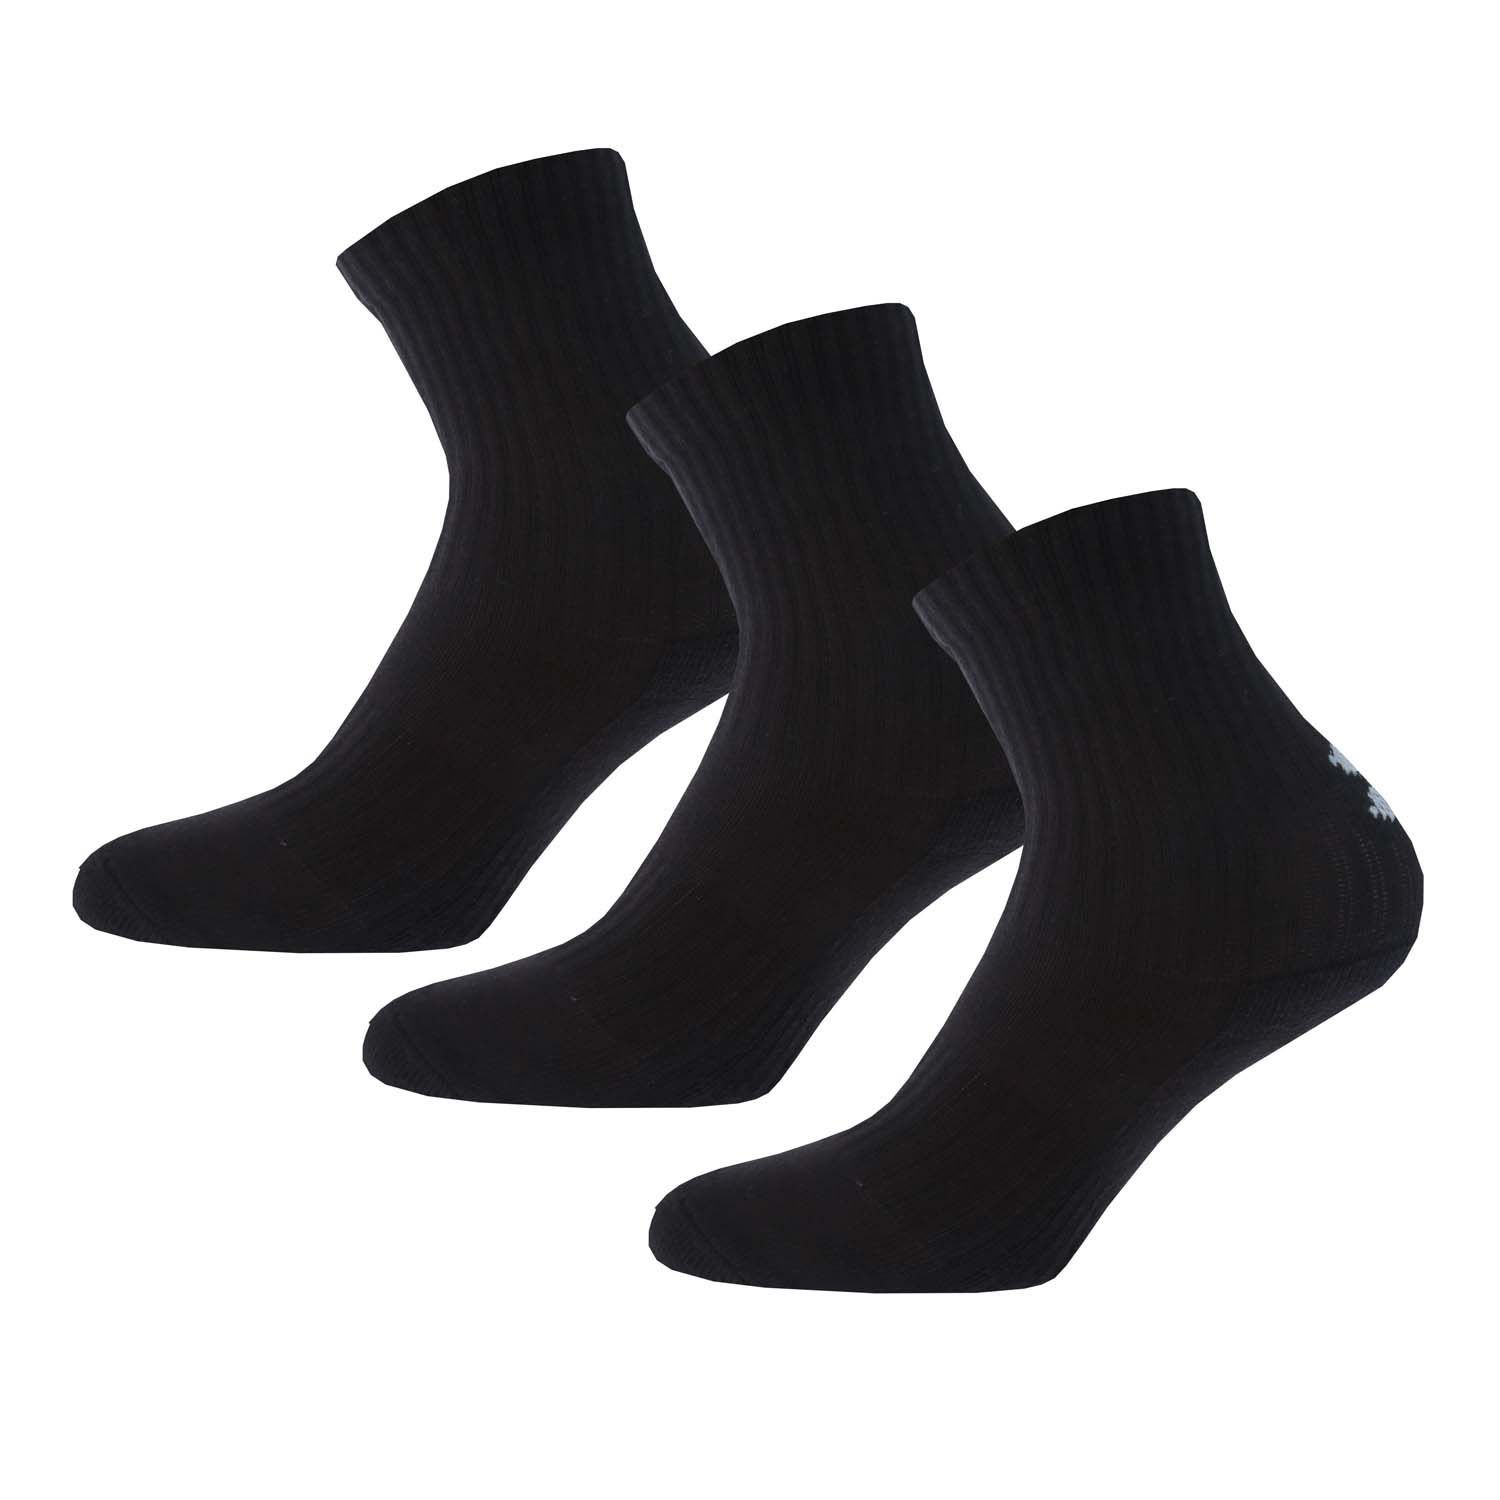 Boys Under Armour Core 3- Pack No Show Socks in black.- Three pairs per pack. - Soft cotton-blend socks are lightweight & comfortable  perfect for everyday wear.- Ribbed cuffs.- Soft cotton-blend socks are lightweight & comfortable  perfect for everyday wear.- Medium cushioning throughout foot for all-day comfort.- Fitted heel contours around your foot for a better fit.- 70% Cotton  27% Polyester  3% Elastane. Machine washable.- Ref: 1365881001